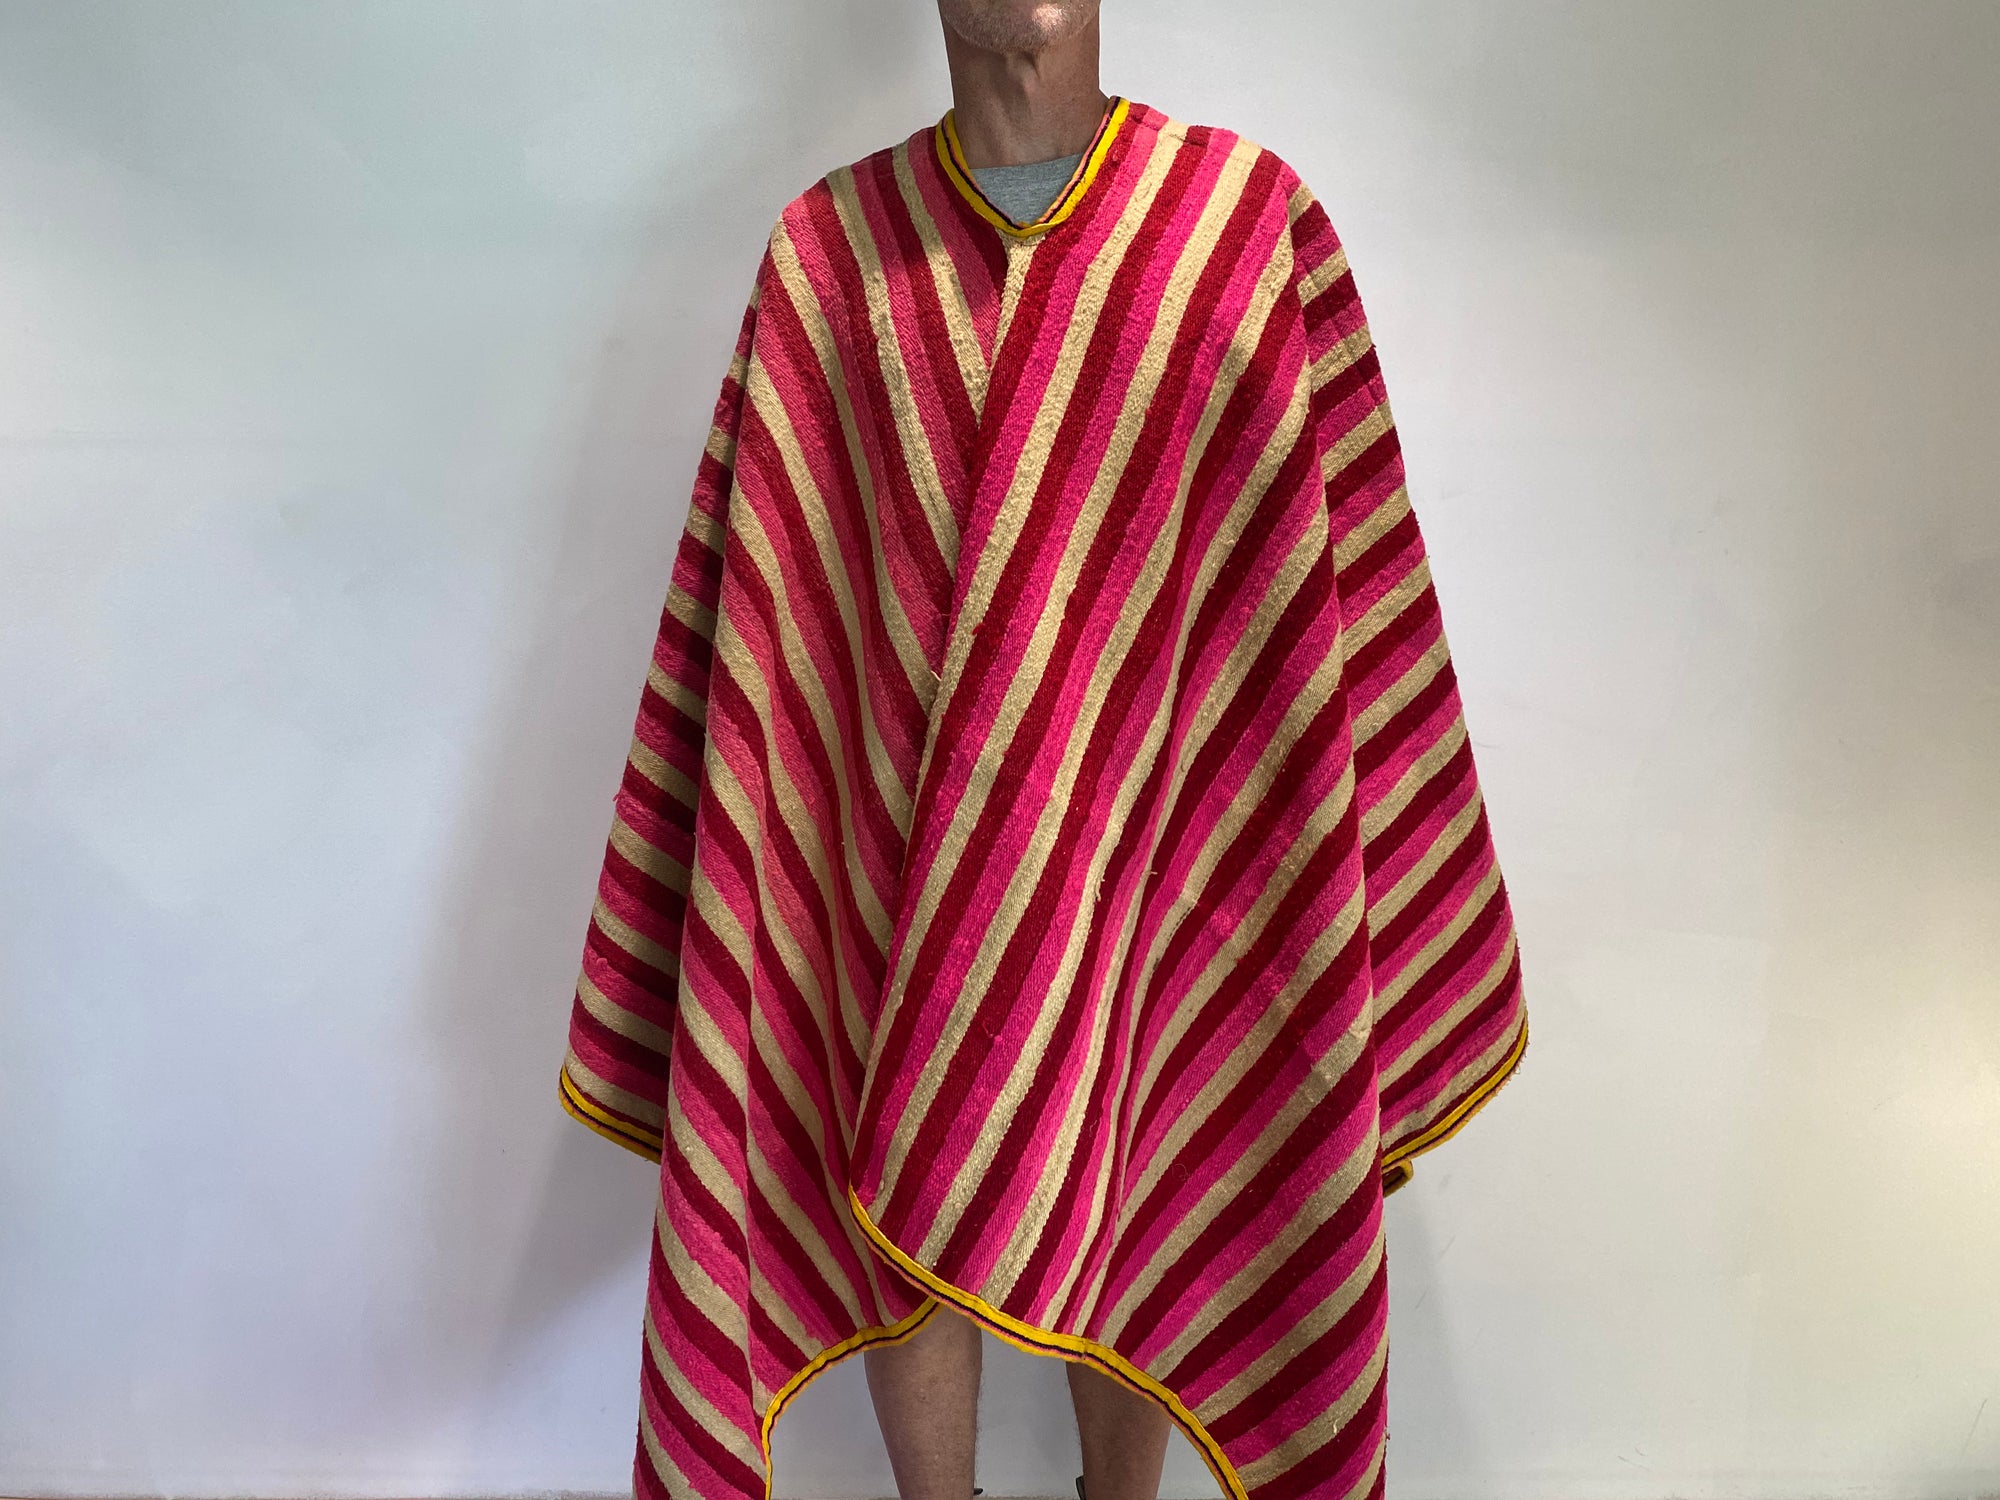 Traditional Ecuadorian men's alpaca wool blanket poncho. Circa 1960. From the Andes Mountains, Ecuador. Featuring a very heavy aguayo traditional weave with cotton border. Typically worn by cowboys in Ecuador. Measurements: width 170 x length 176 cm. Neck opening 29 cm.